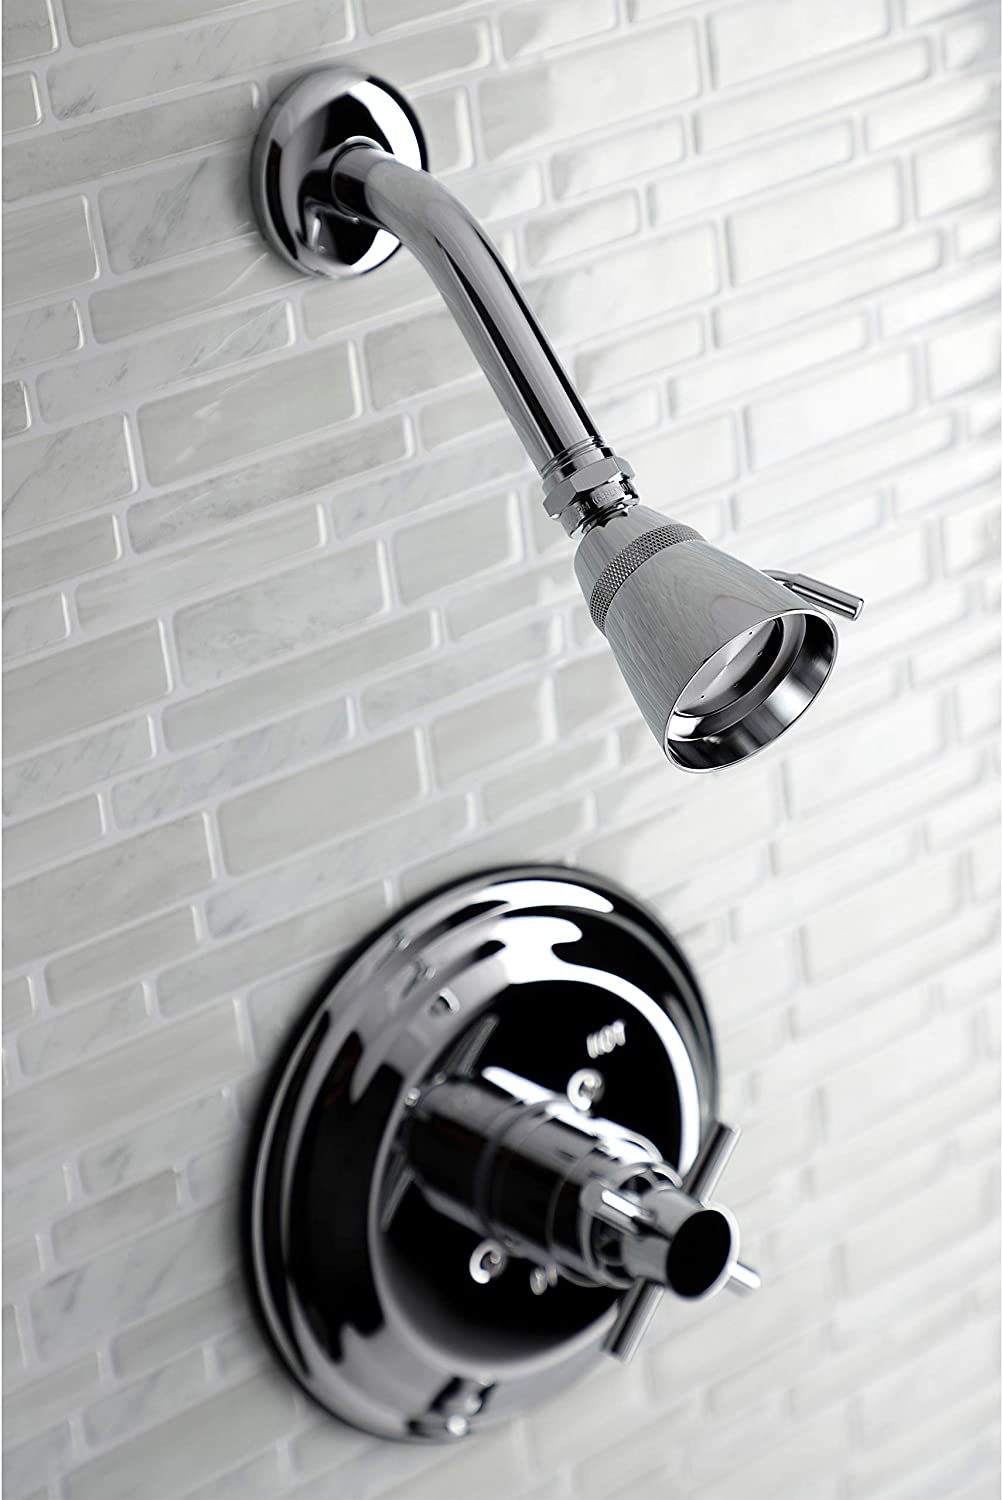 Kingston Brass KB2631DXTSO Concord Shower Faucet Trim Only, Polished Chrome